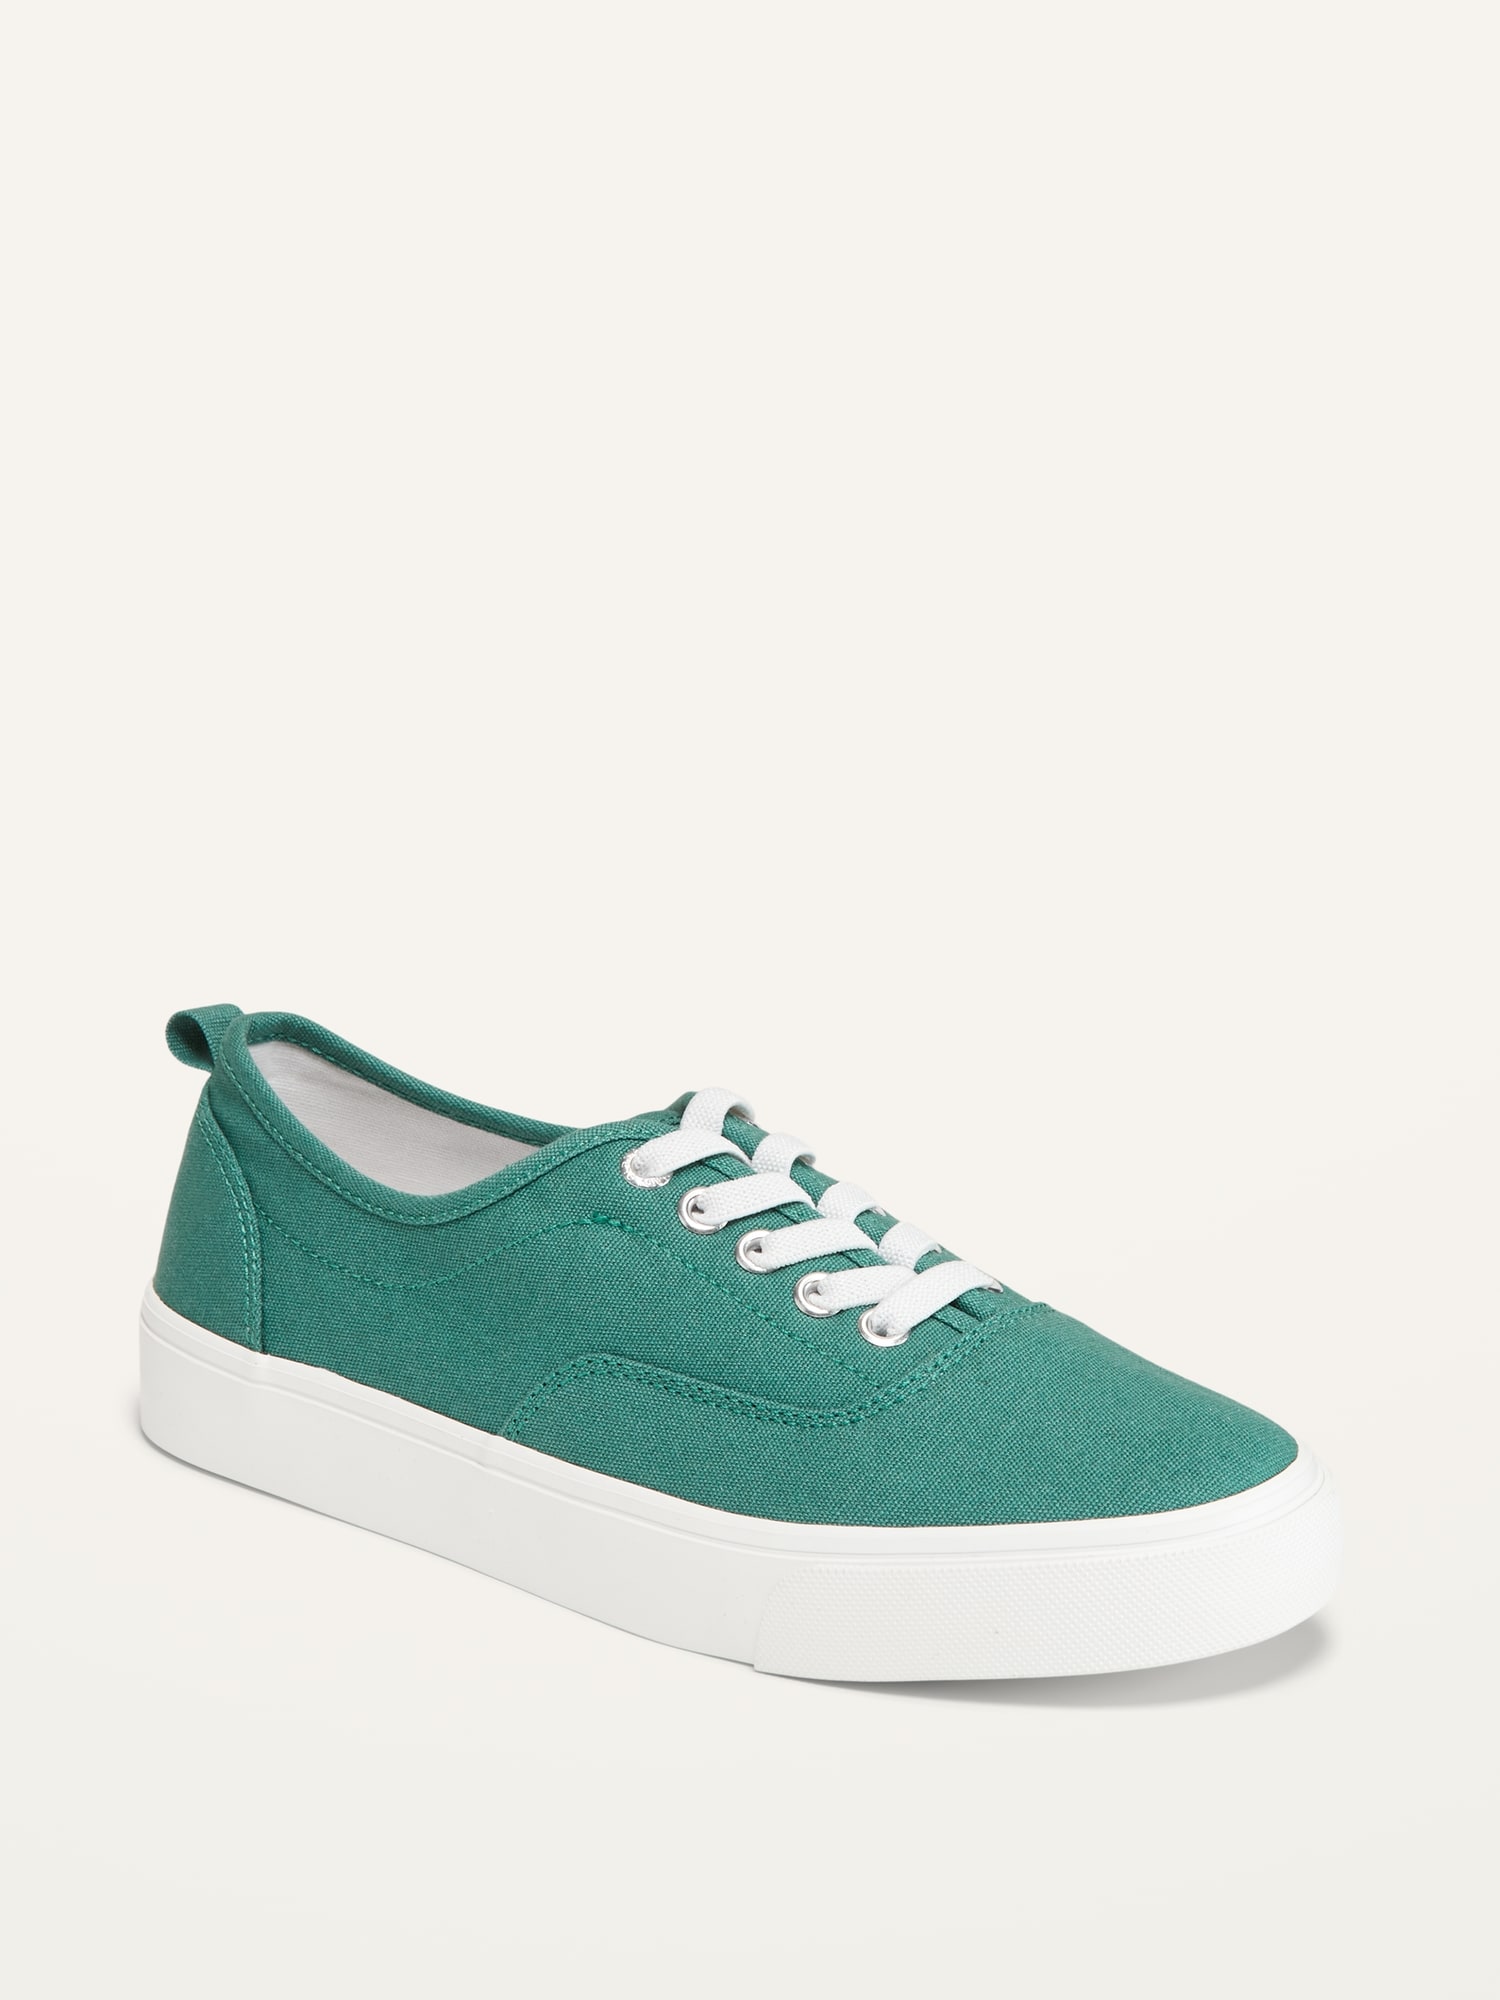 Gender-Neutral Canvas Elastic-Lace Sneakers for Kids | Old Navy